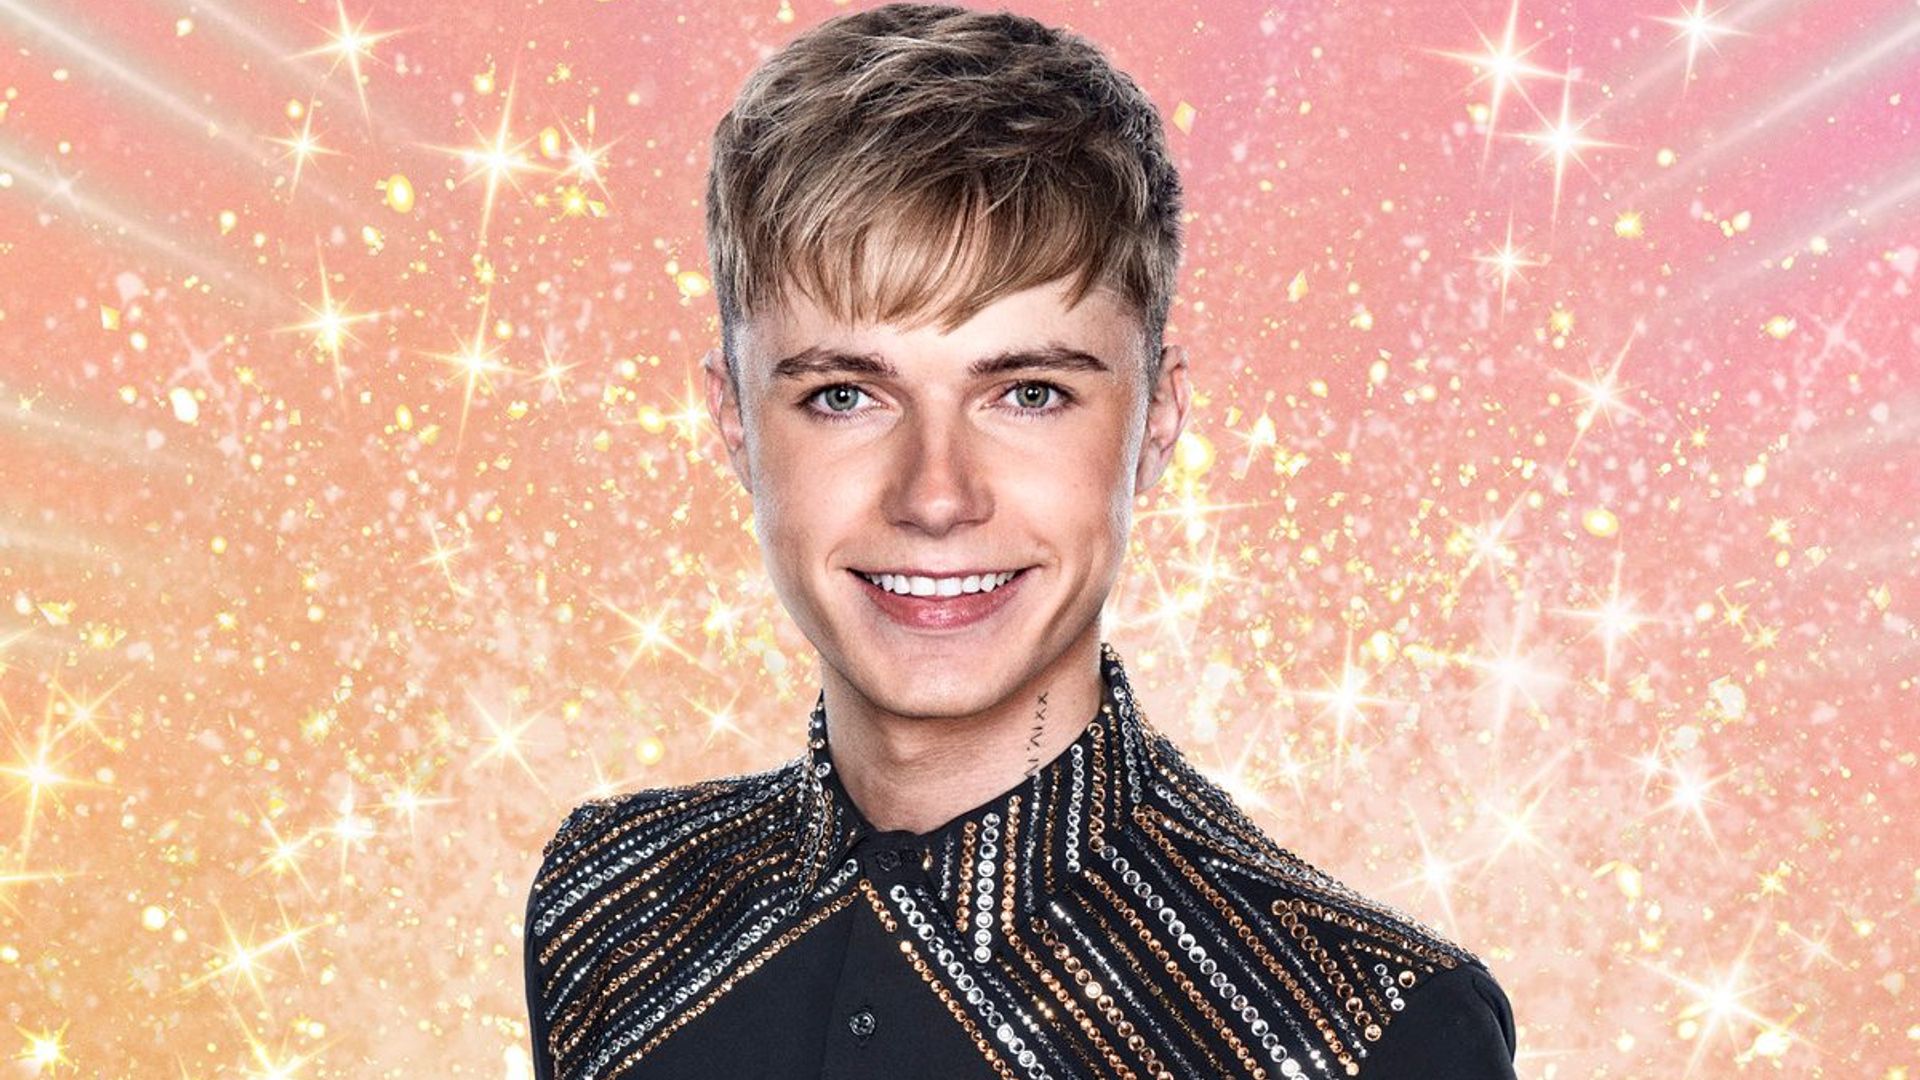 strictly come dancing hrvy